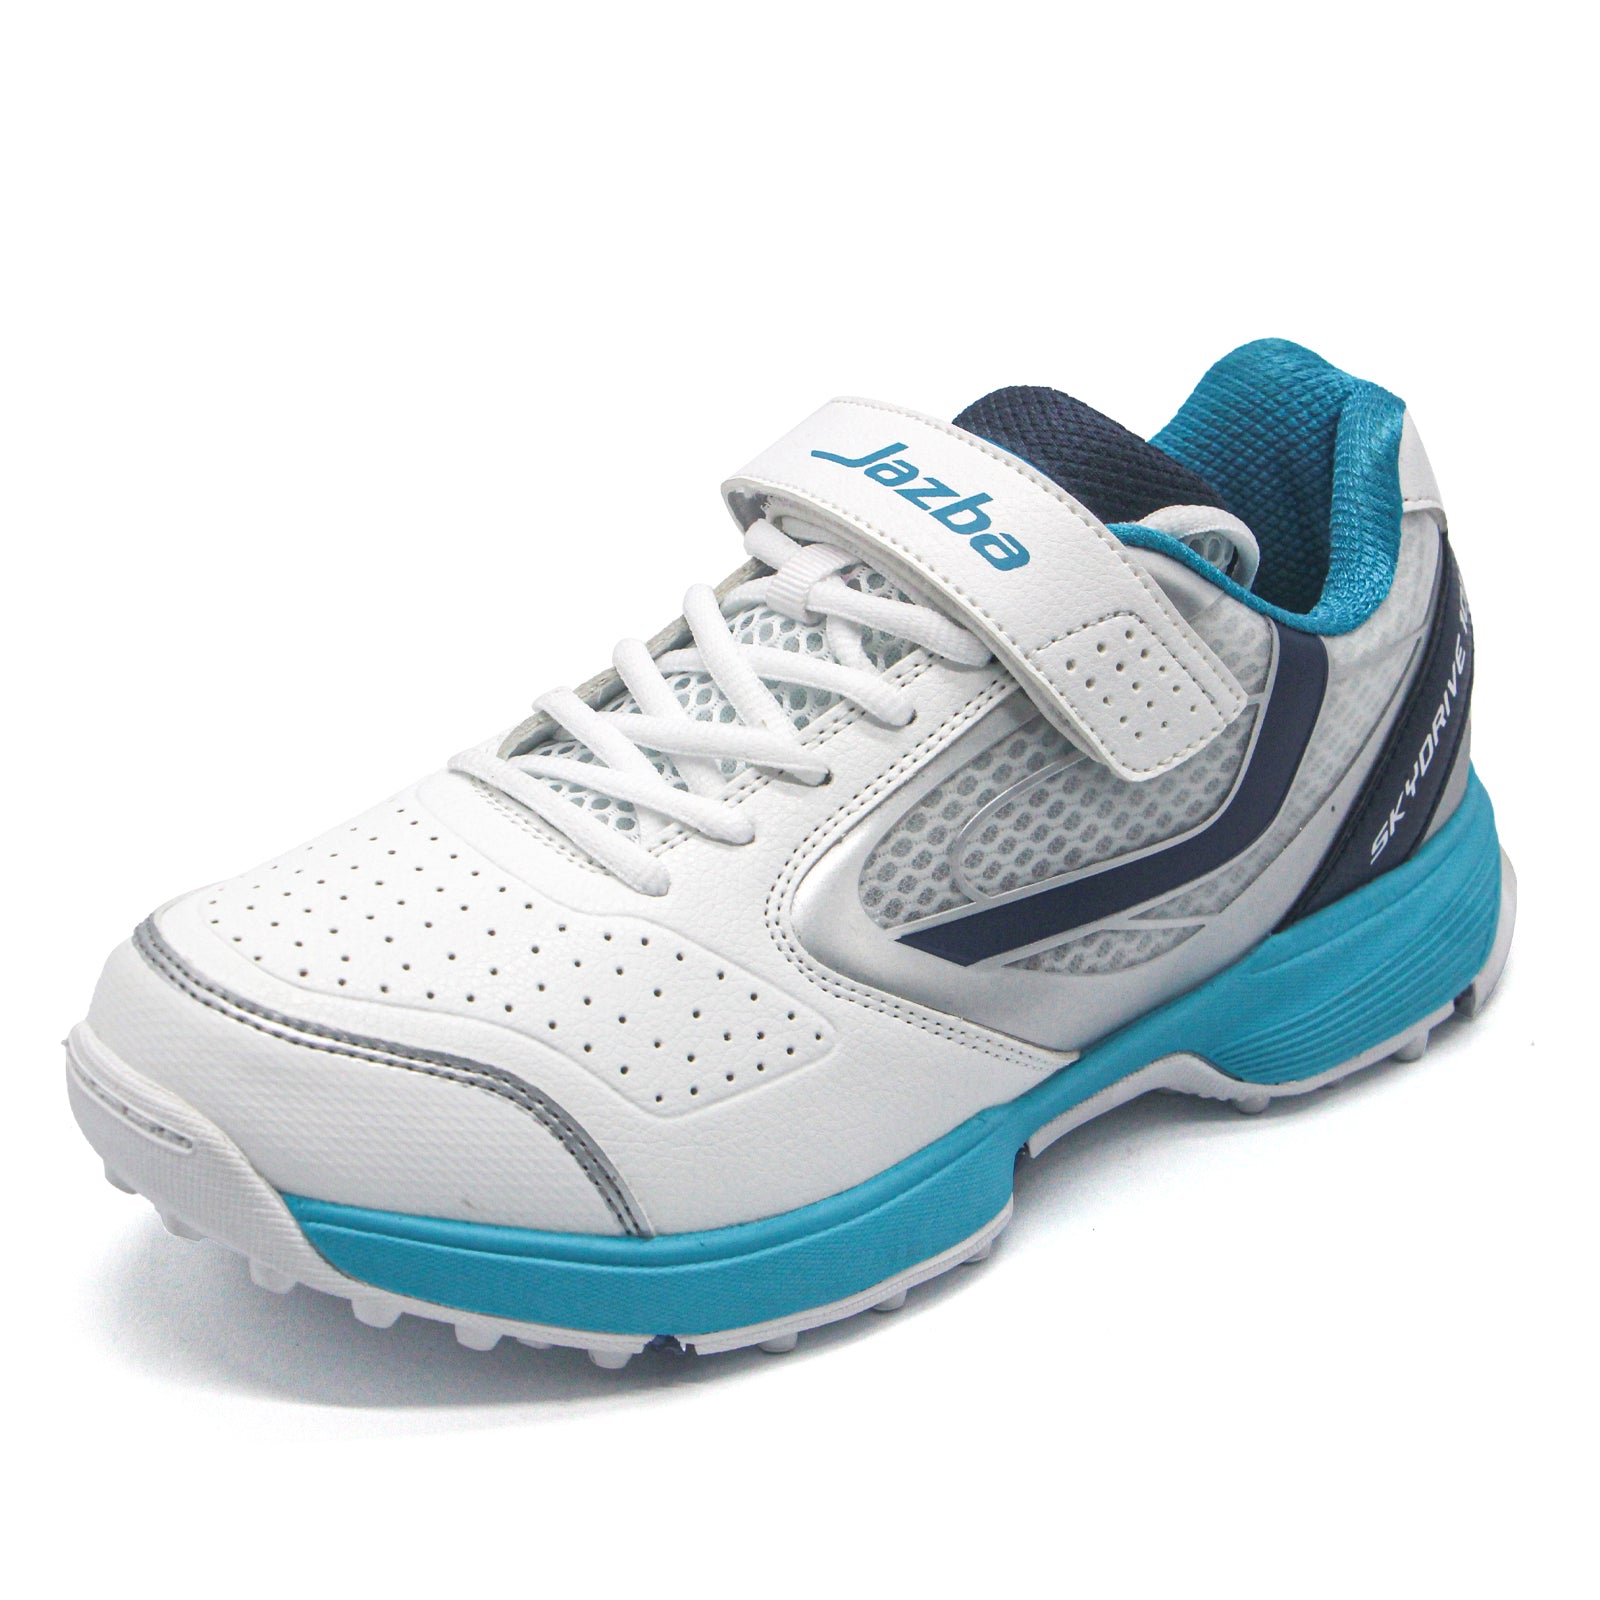 JAZBA RUBBER CRICKET SHOES SKY DRIVE 103 - TEAL